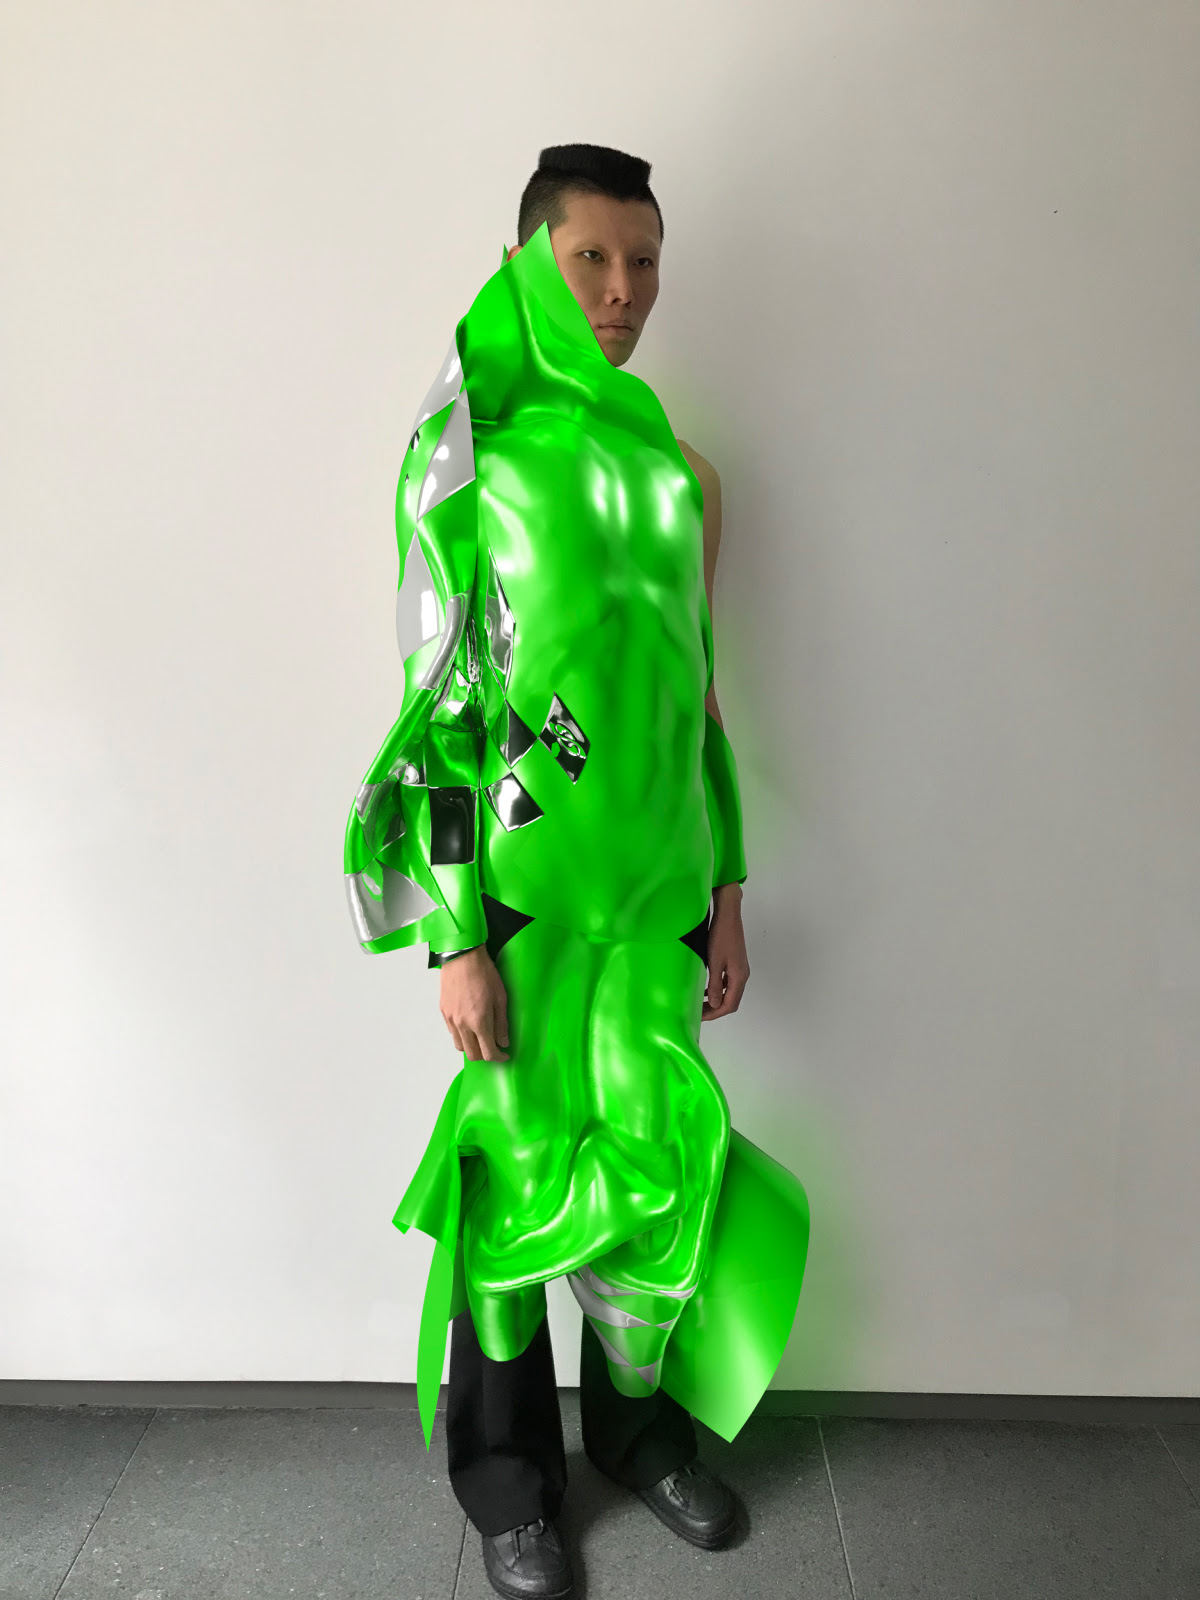 Futuristic fashion examples of 3D fashion design created in CLO 3D available to dress as photo fitting and AR skins